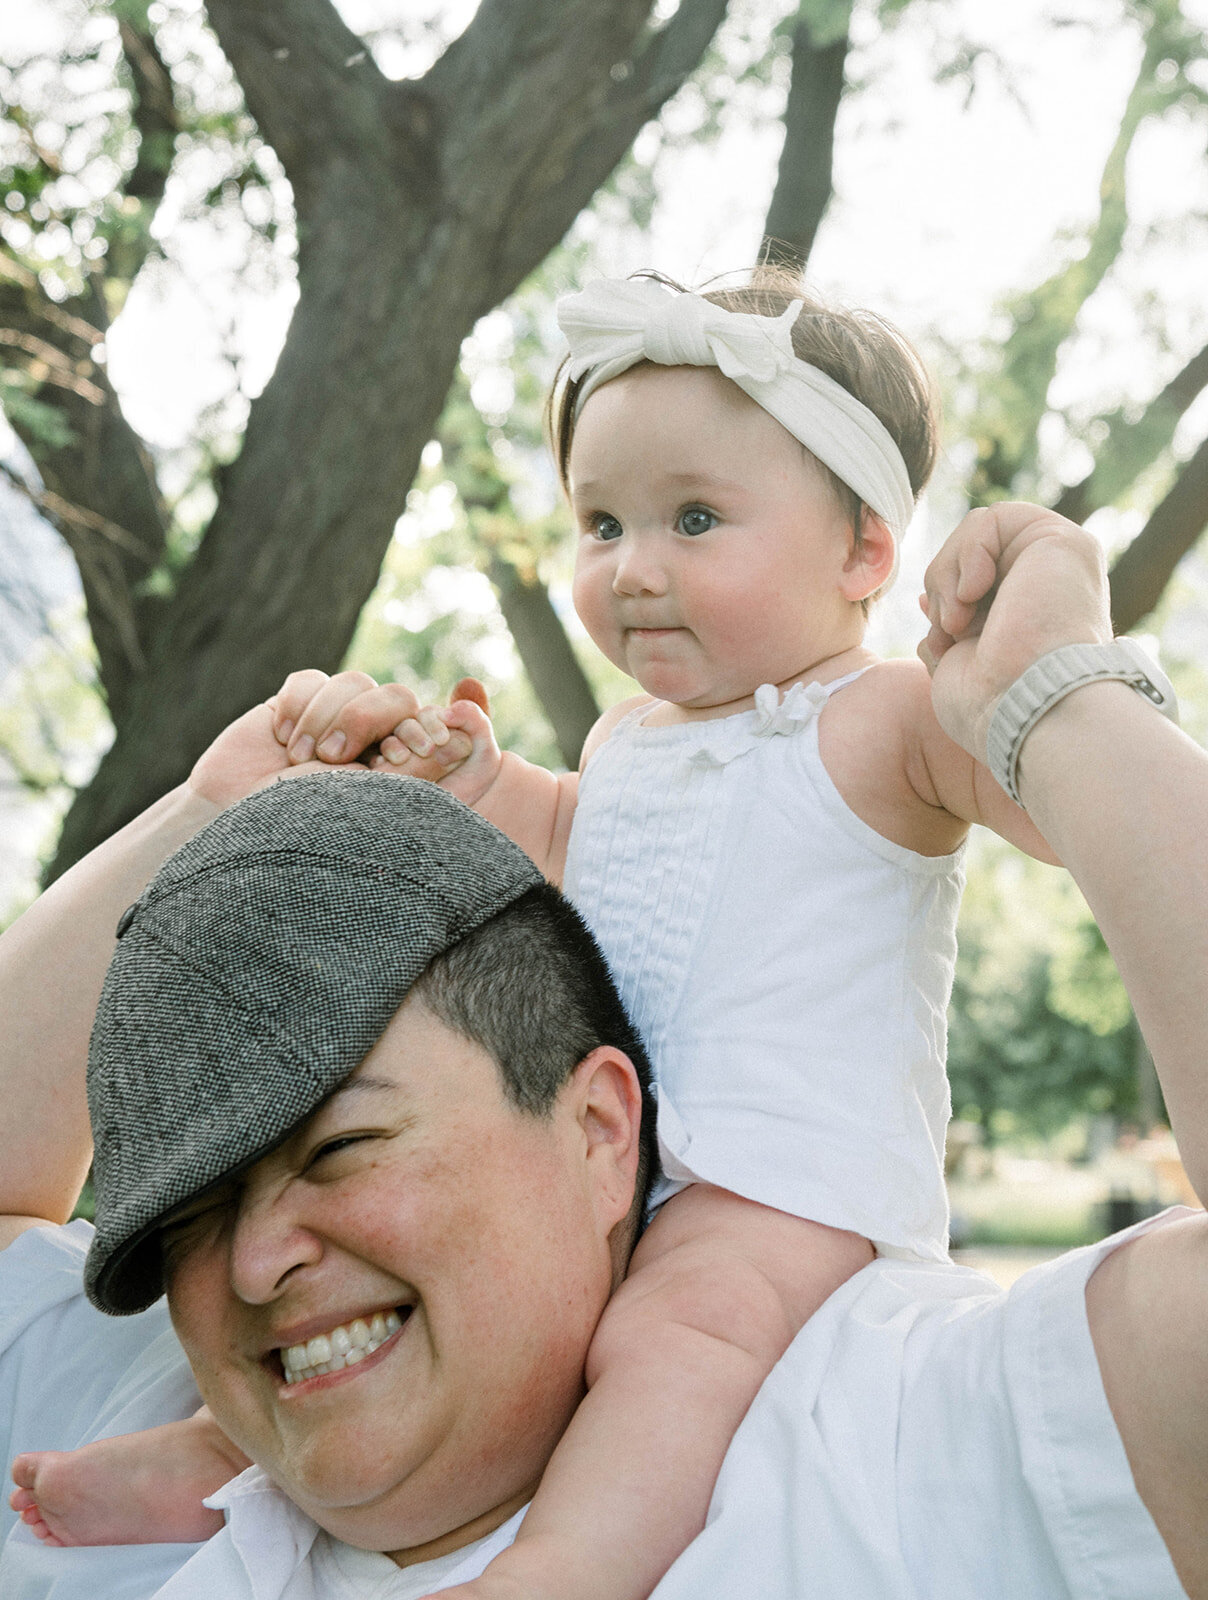 A baby on top of her parent's shoulders outside in a Chicago park